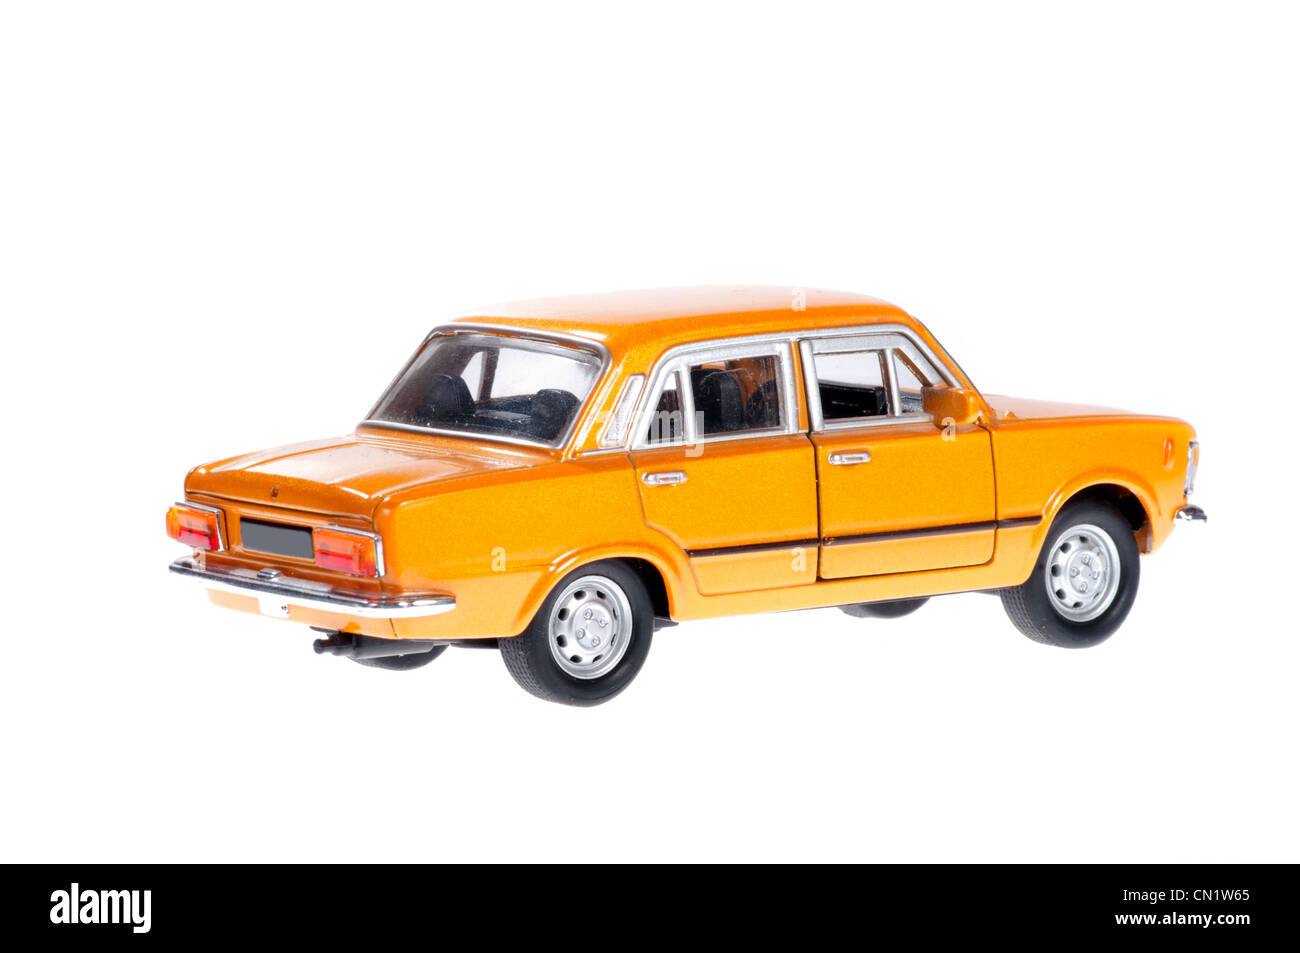 PRL Cars Gold Collection No 2-1/43 Fiat 125p